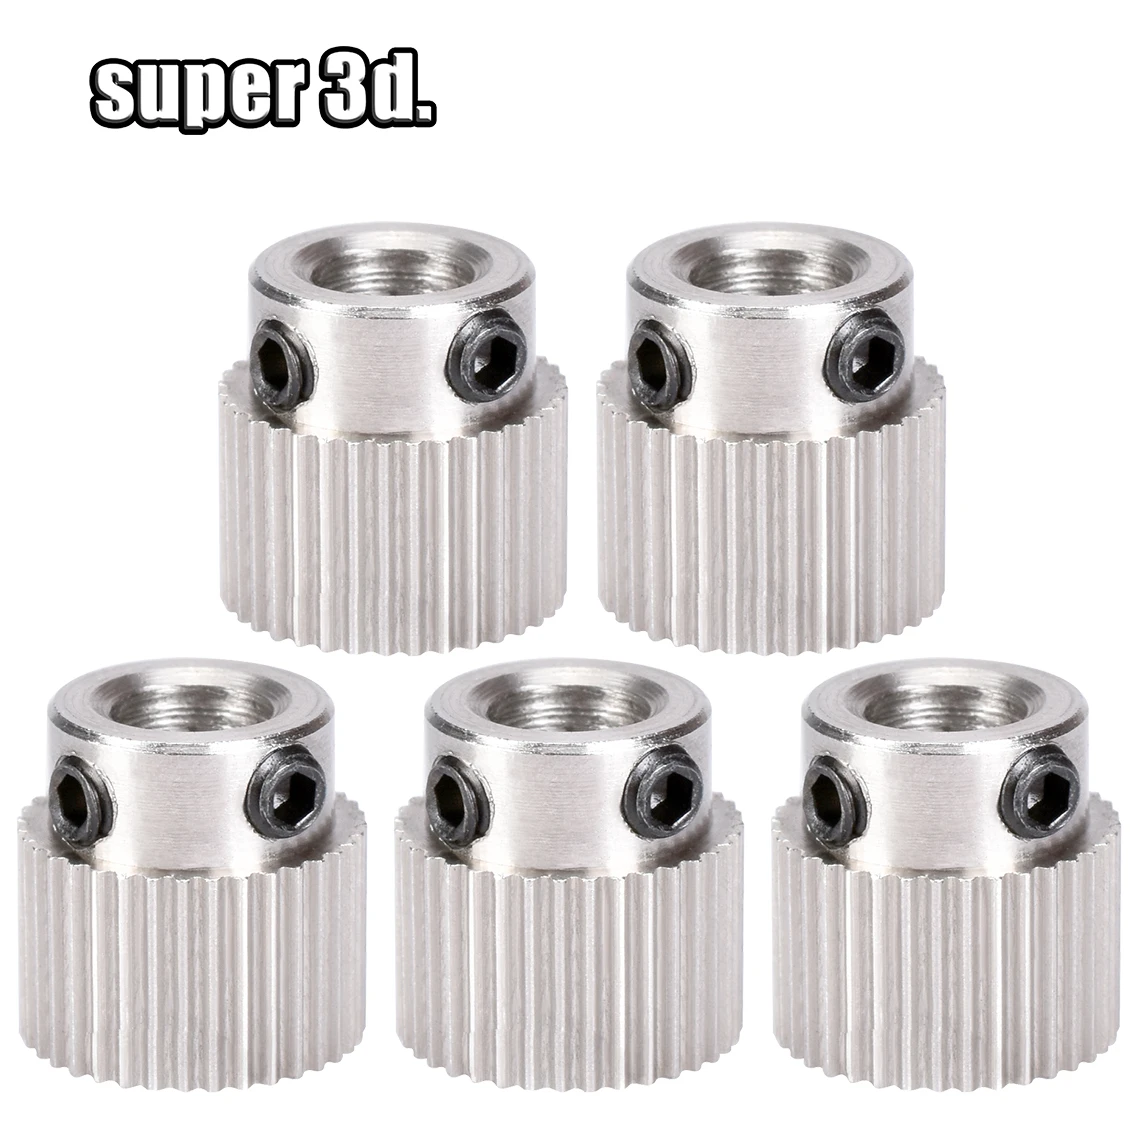 8mm Bore 3D Printer MK7 Stainless Steel Extrusion Gear 